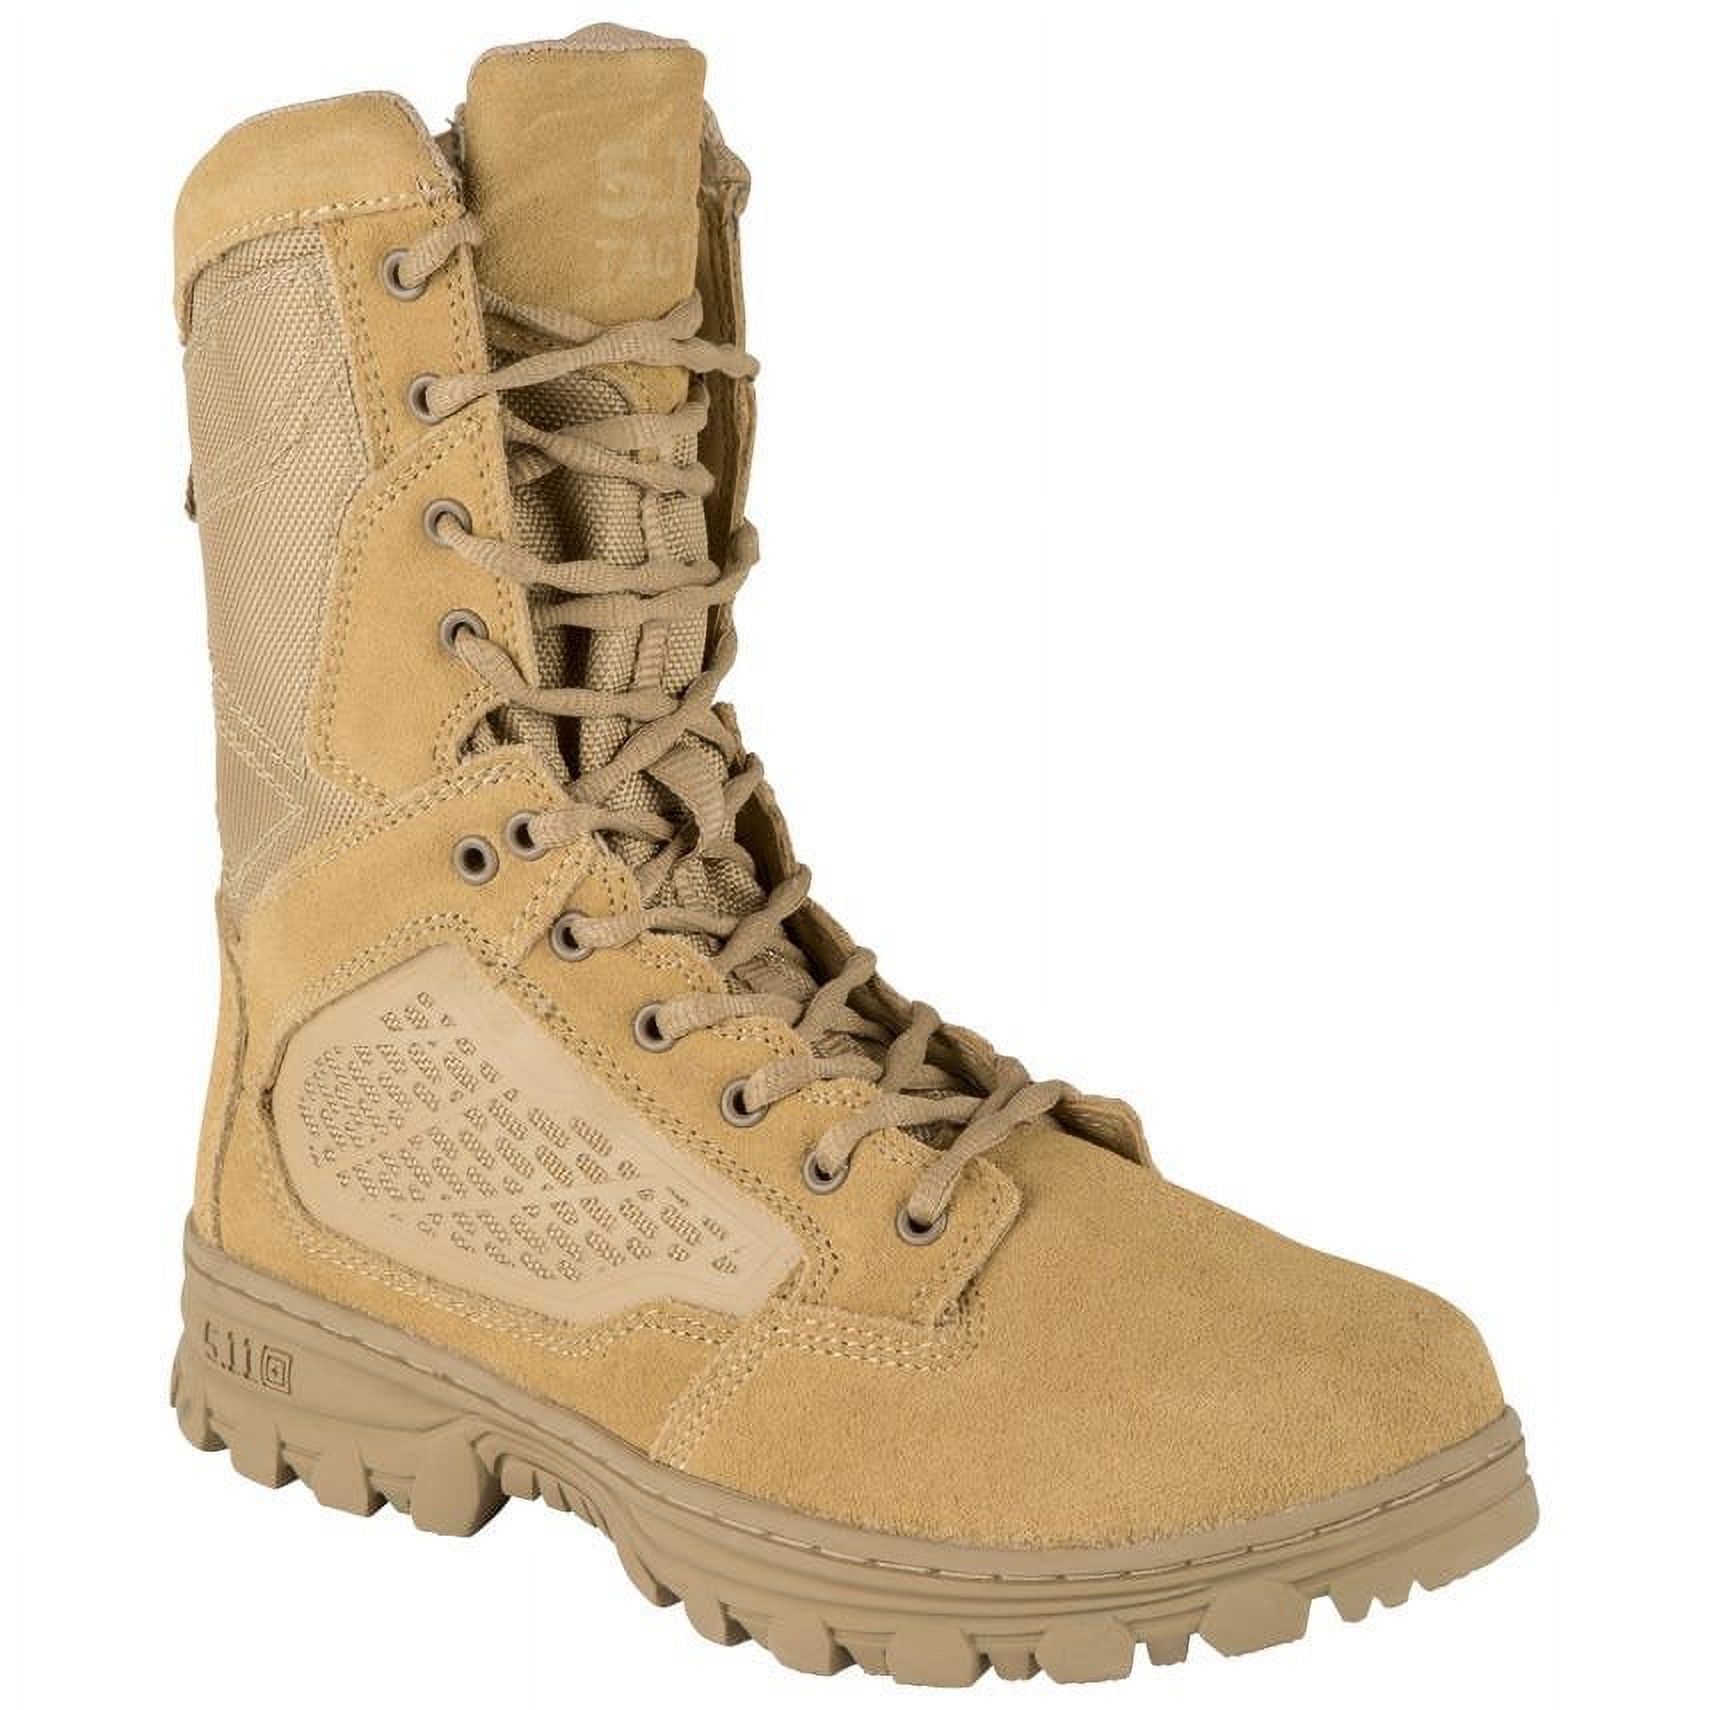 5.11 Work Gear EVO 8-Inch Waterproof Boots, Oil/Slip-Resistant, OrthoLite Insole, Coyote, 15/Regular, Style 12347 - image 1 of 4